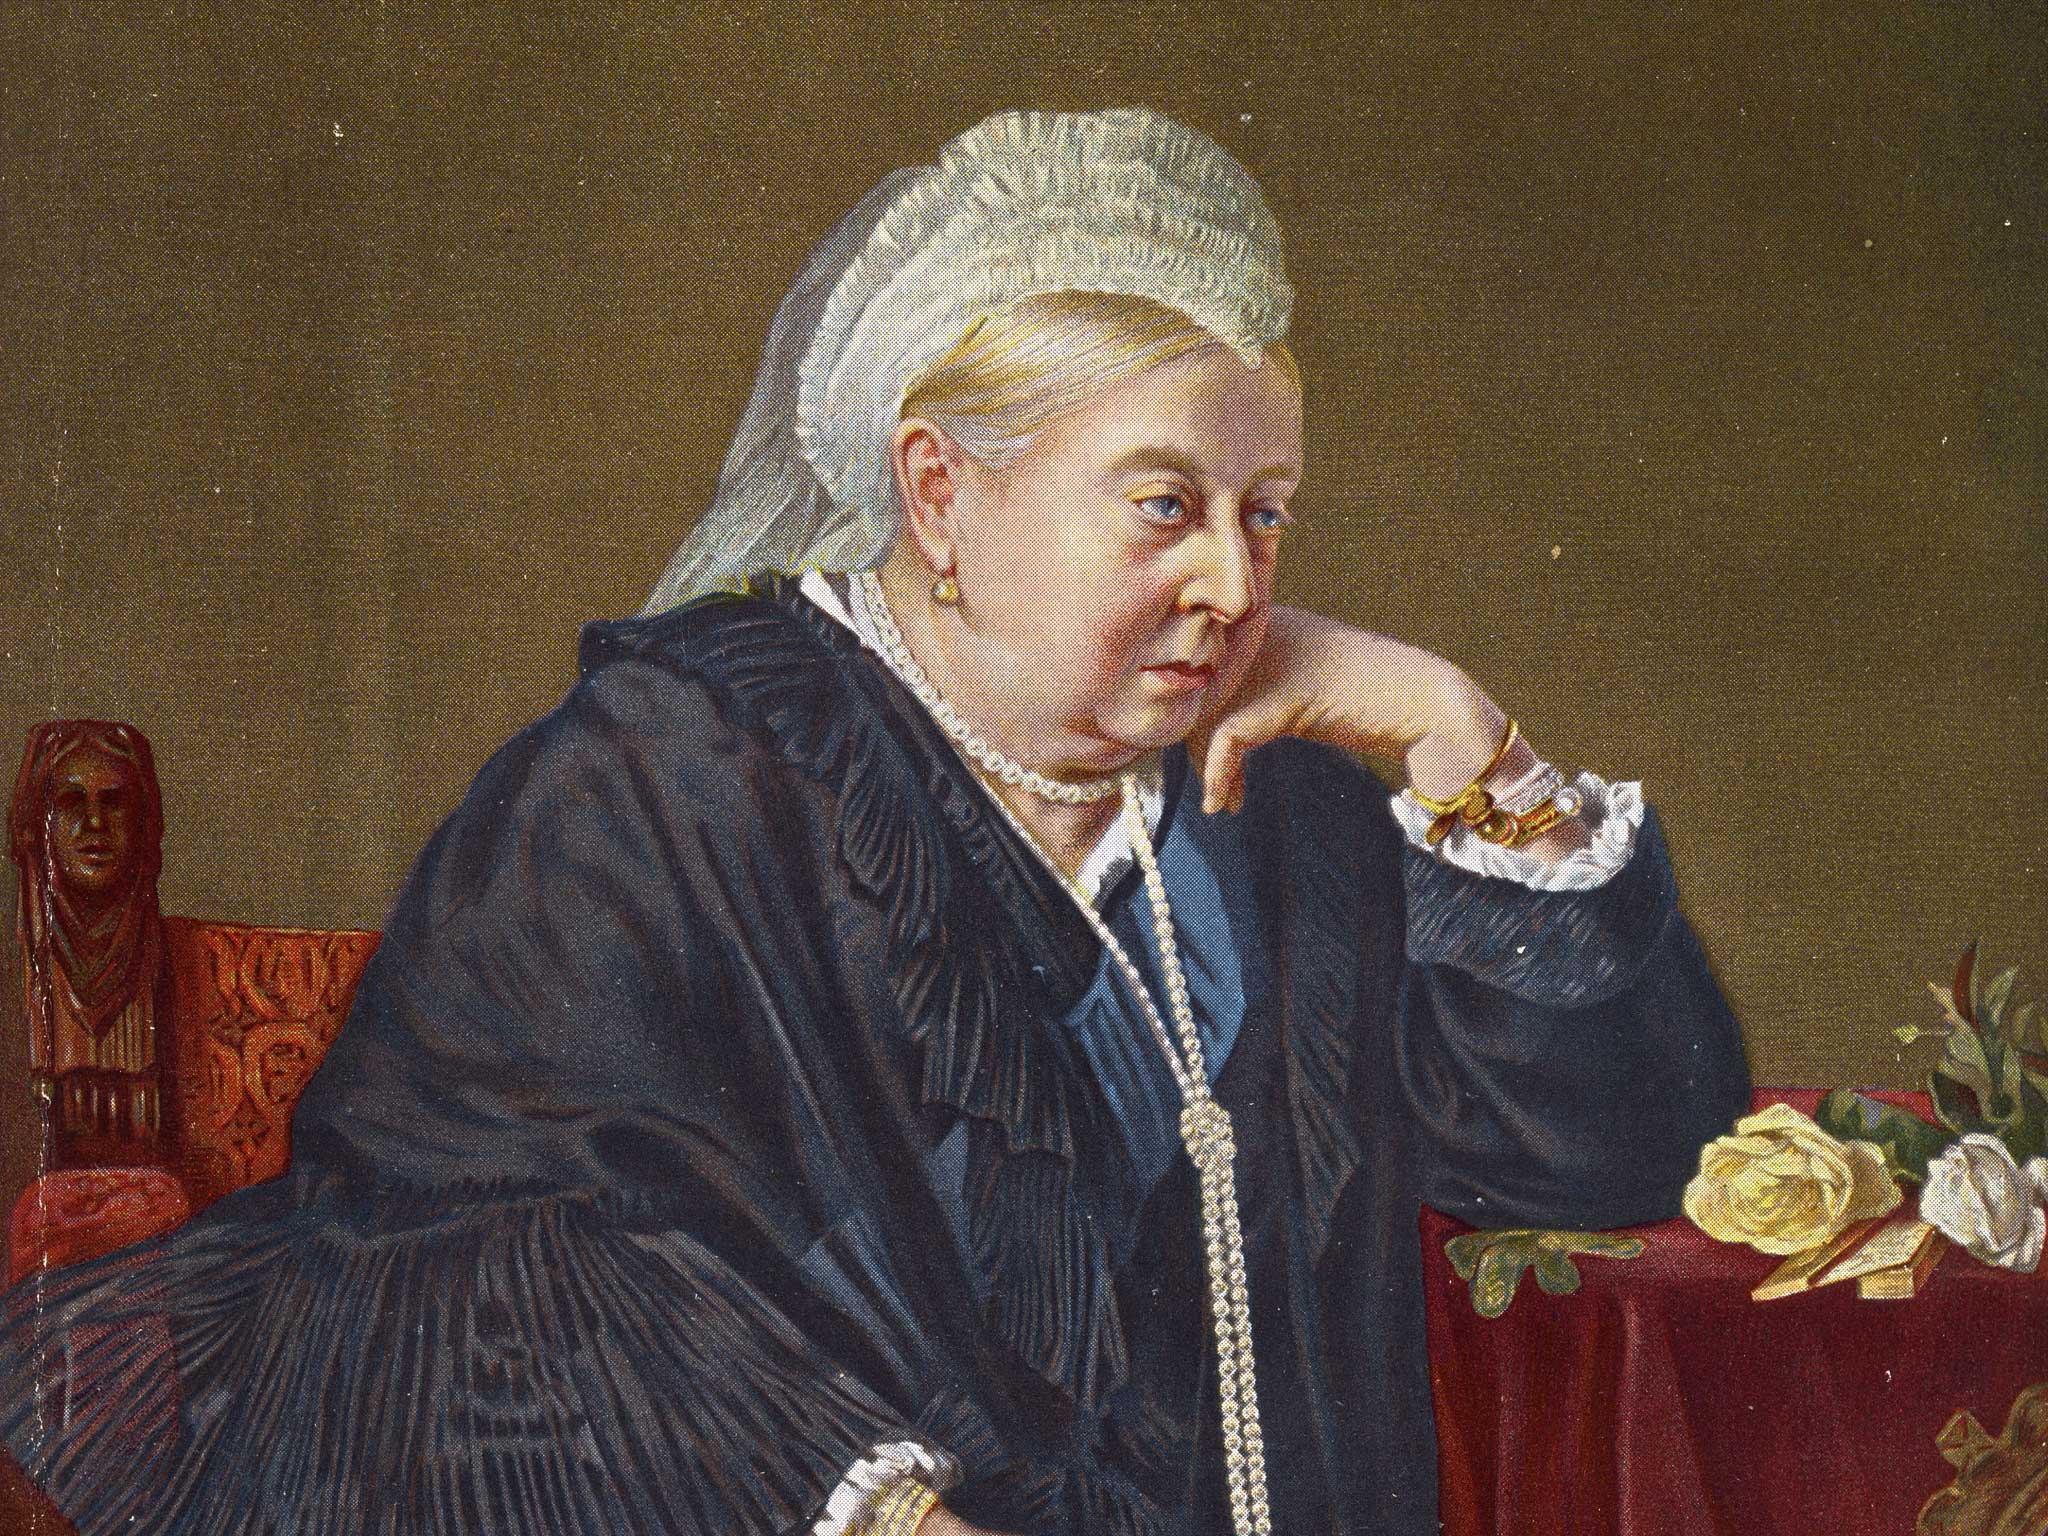 Queen Victoria in 1899 in a painting by Baron Von Angeli